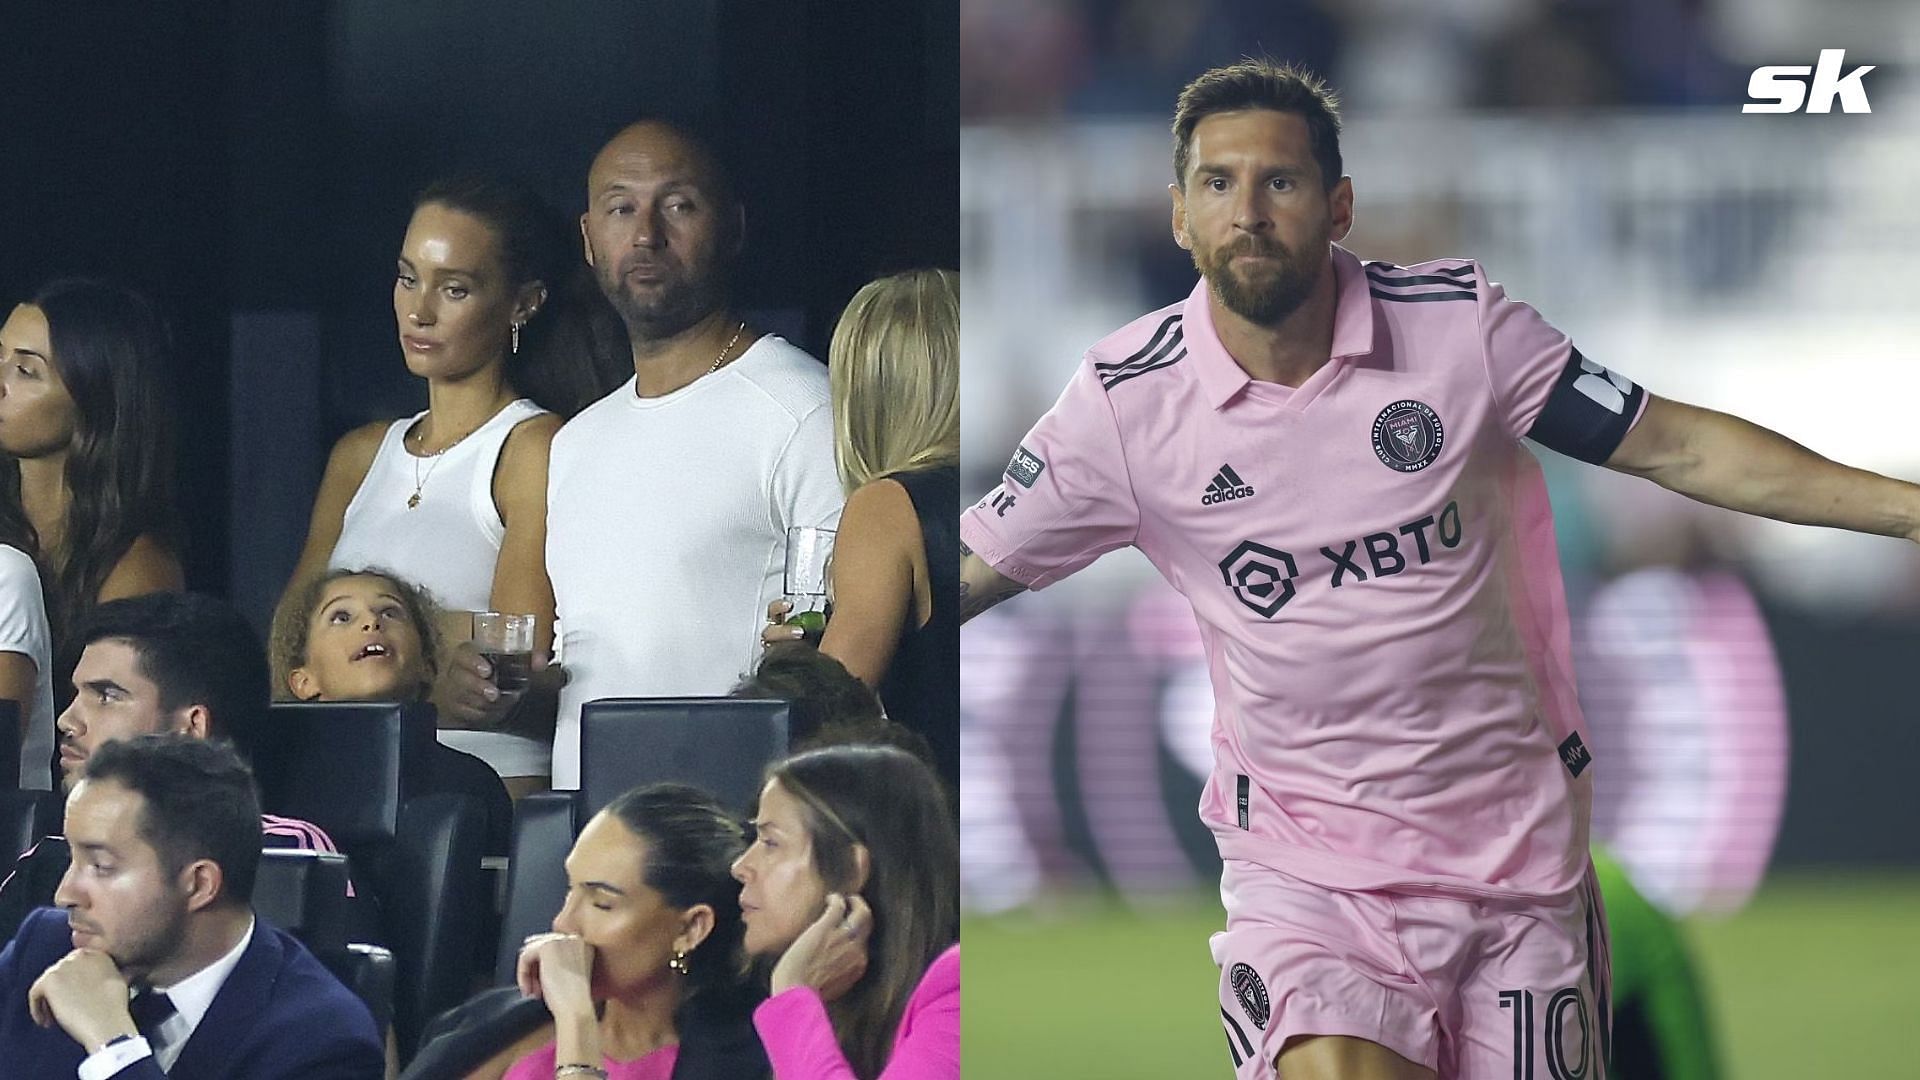 WATCH: Derek Jeter poses with soccer stars at the Inter Miami game 